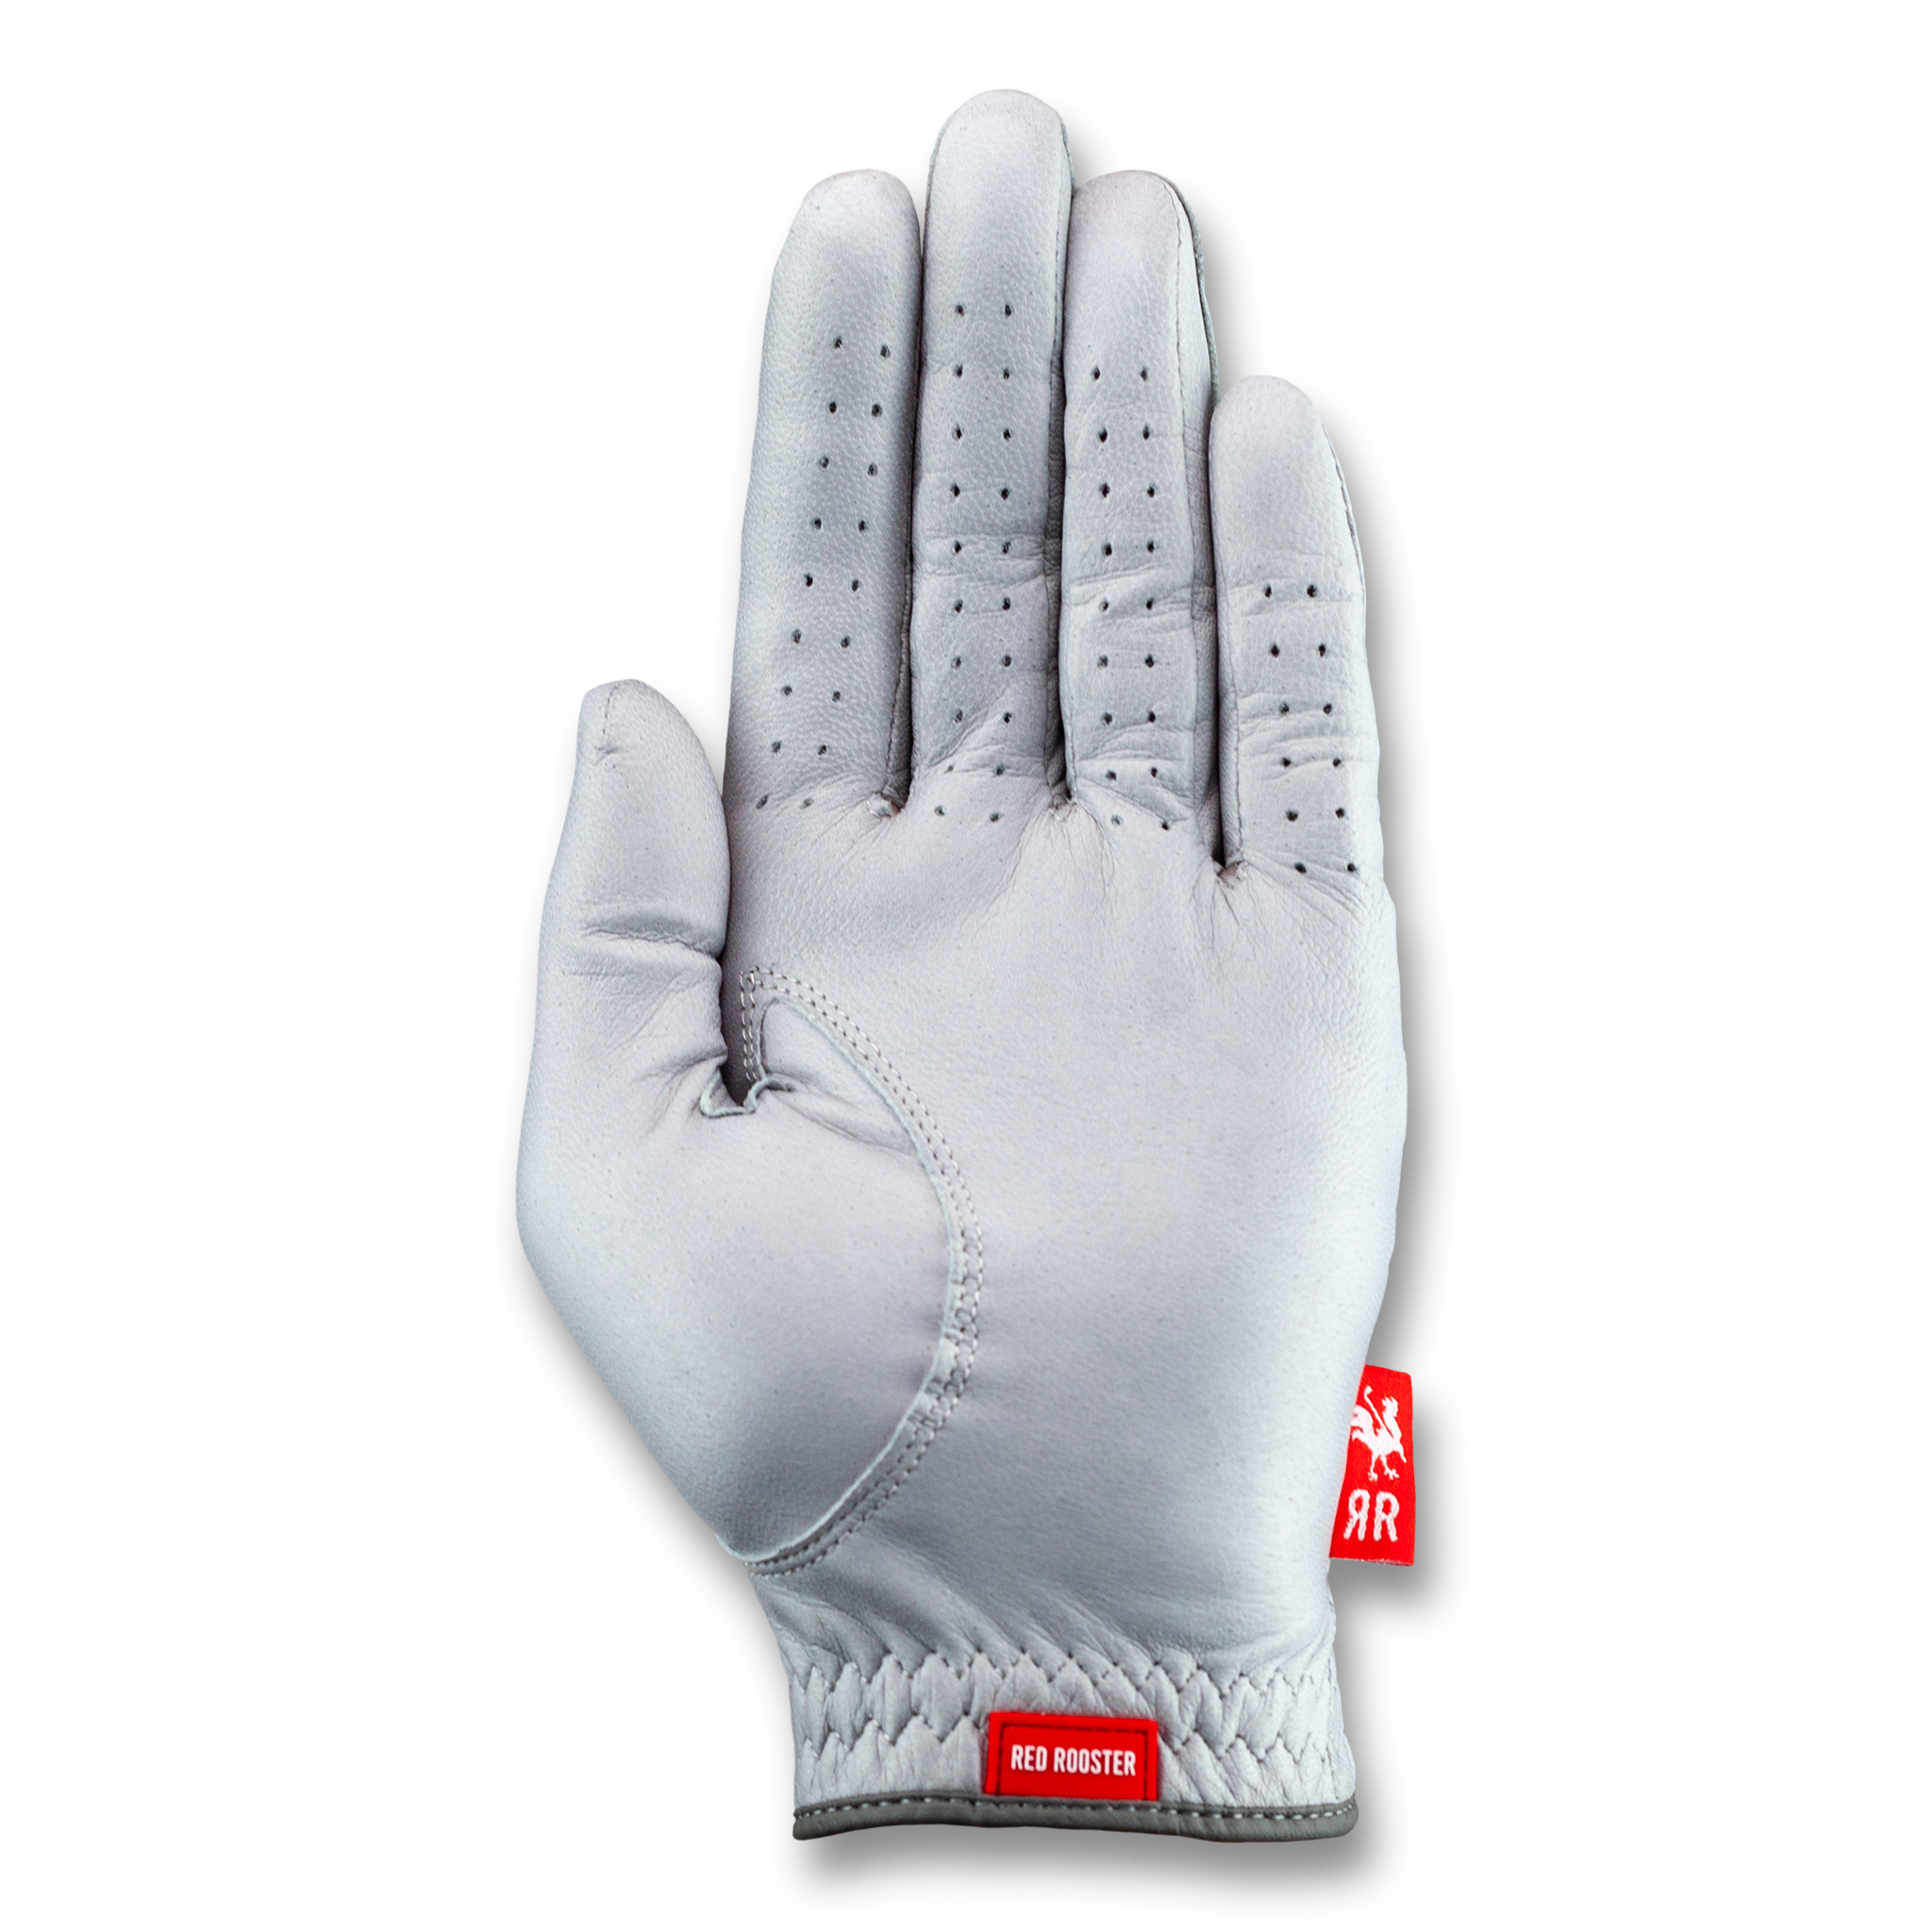 The Scots Silver golf glove inner view